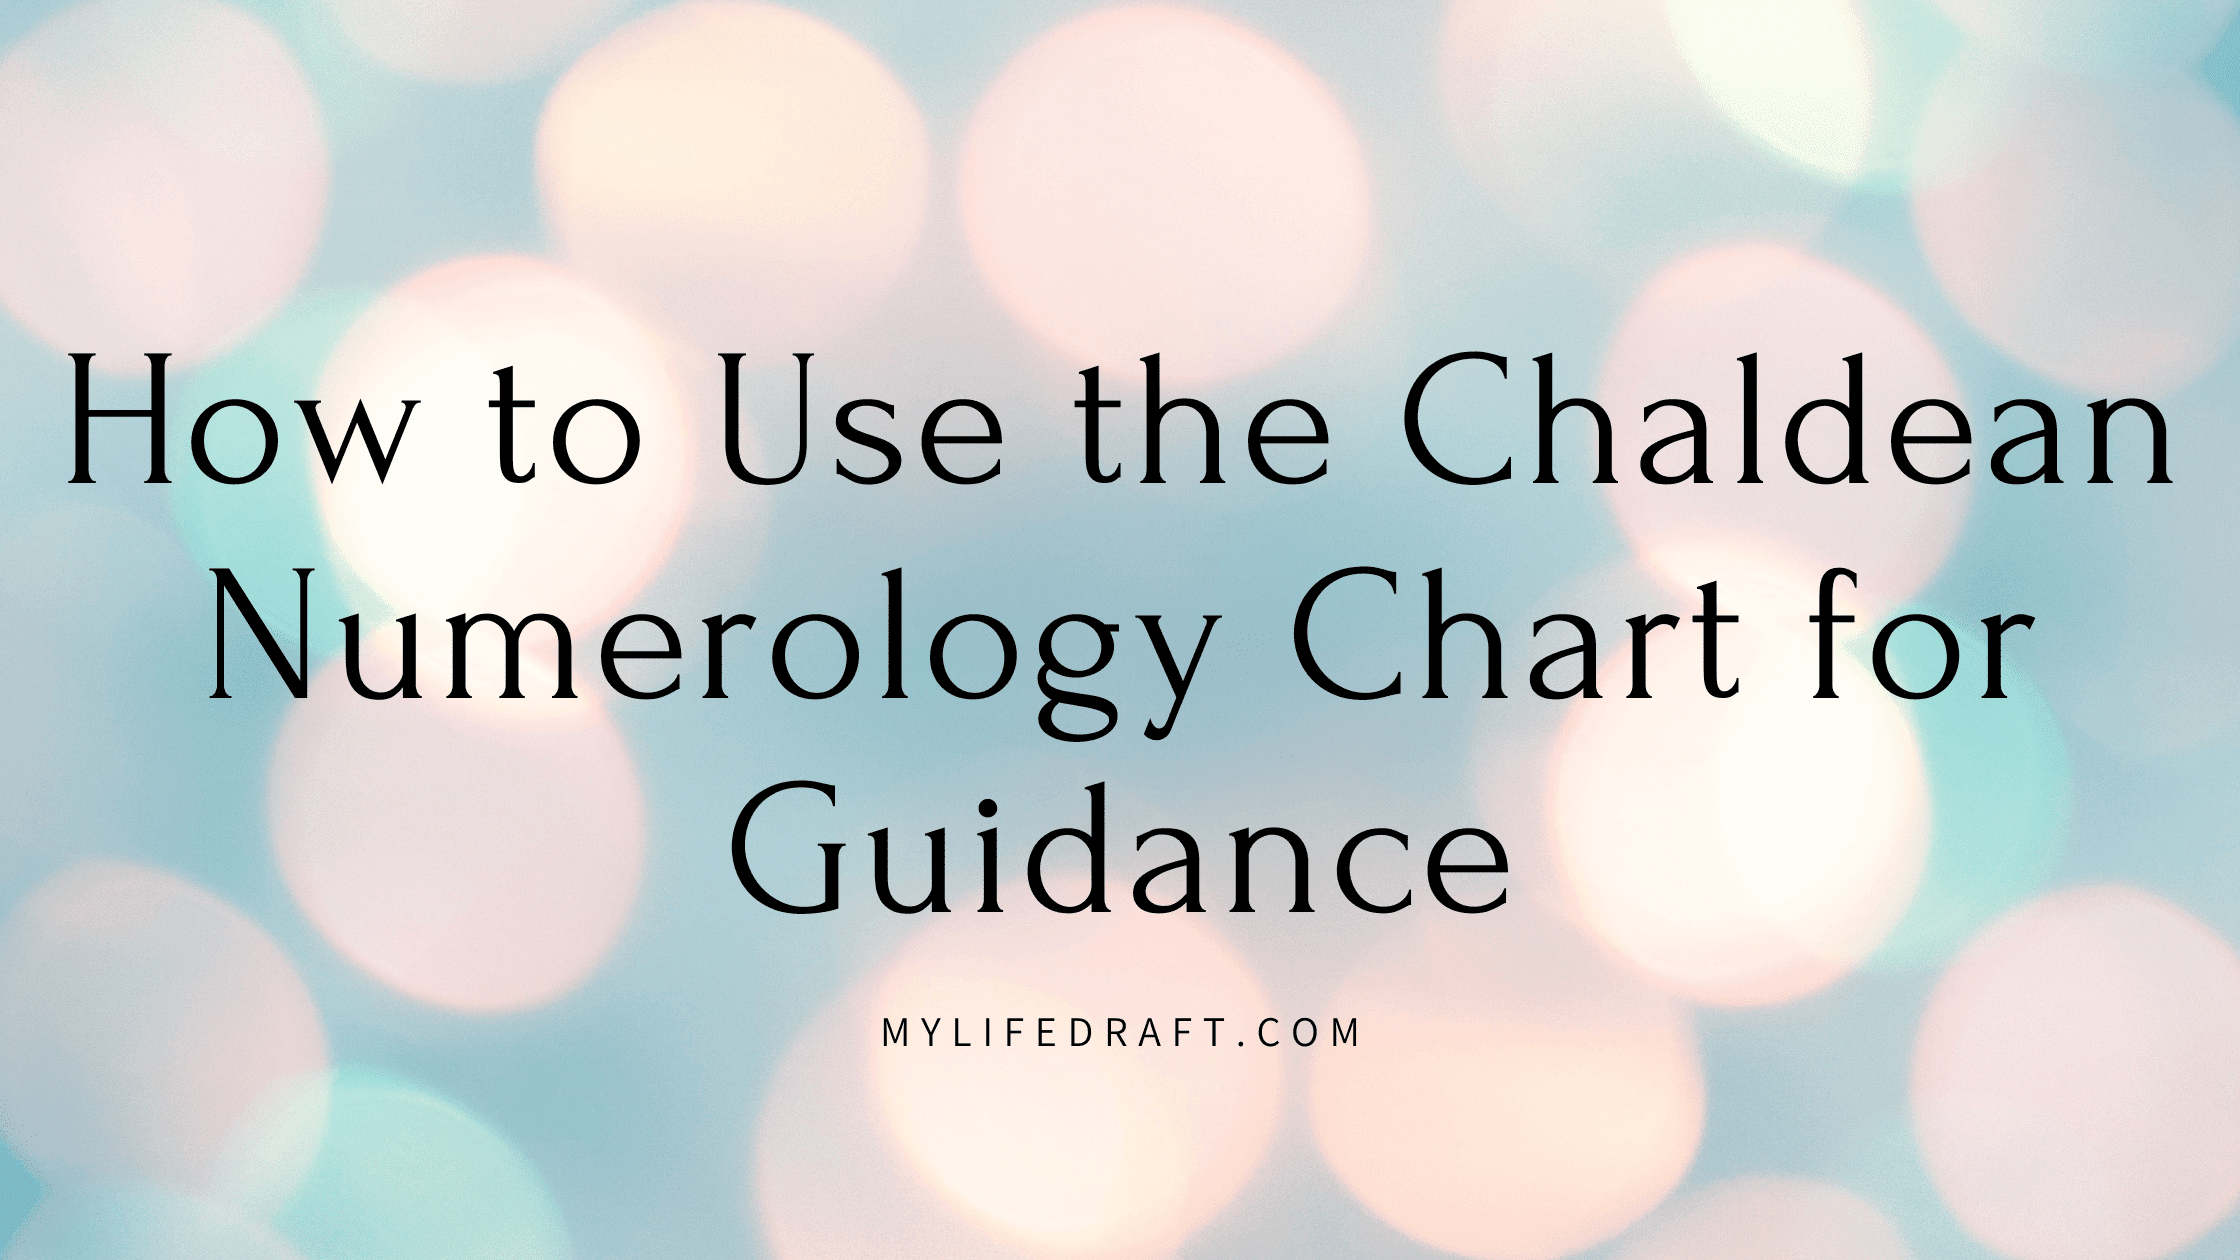 How to Use the Chaldean Numerology Chart for Guidance